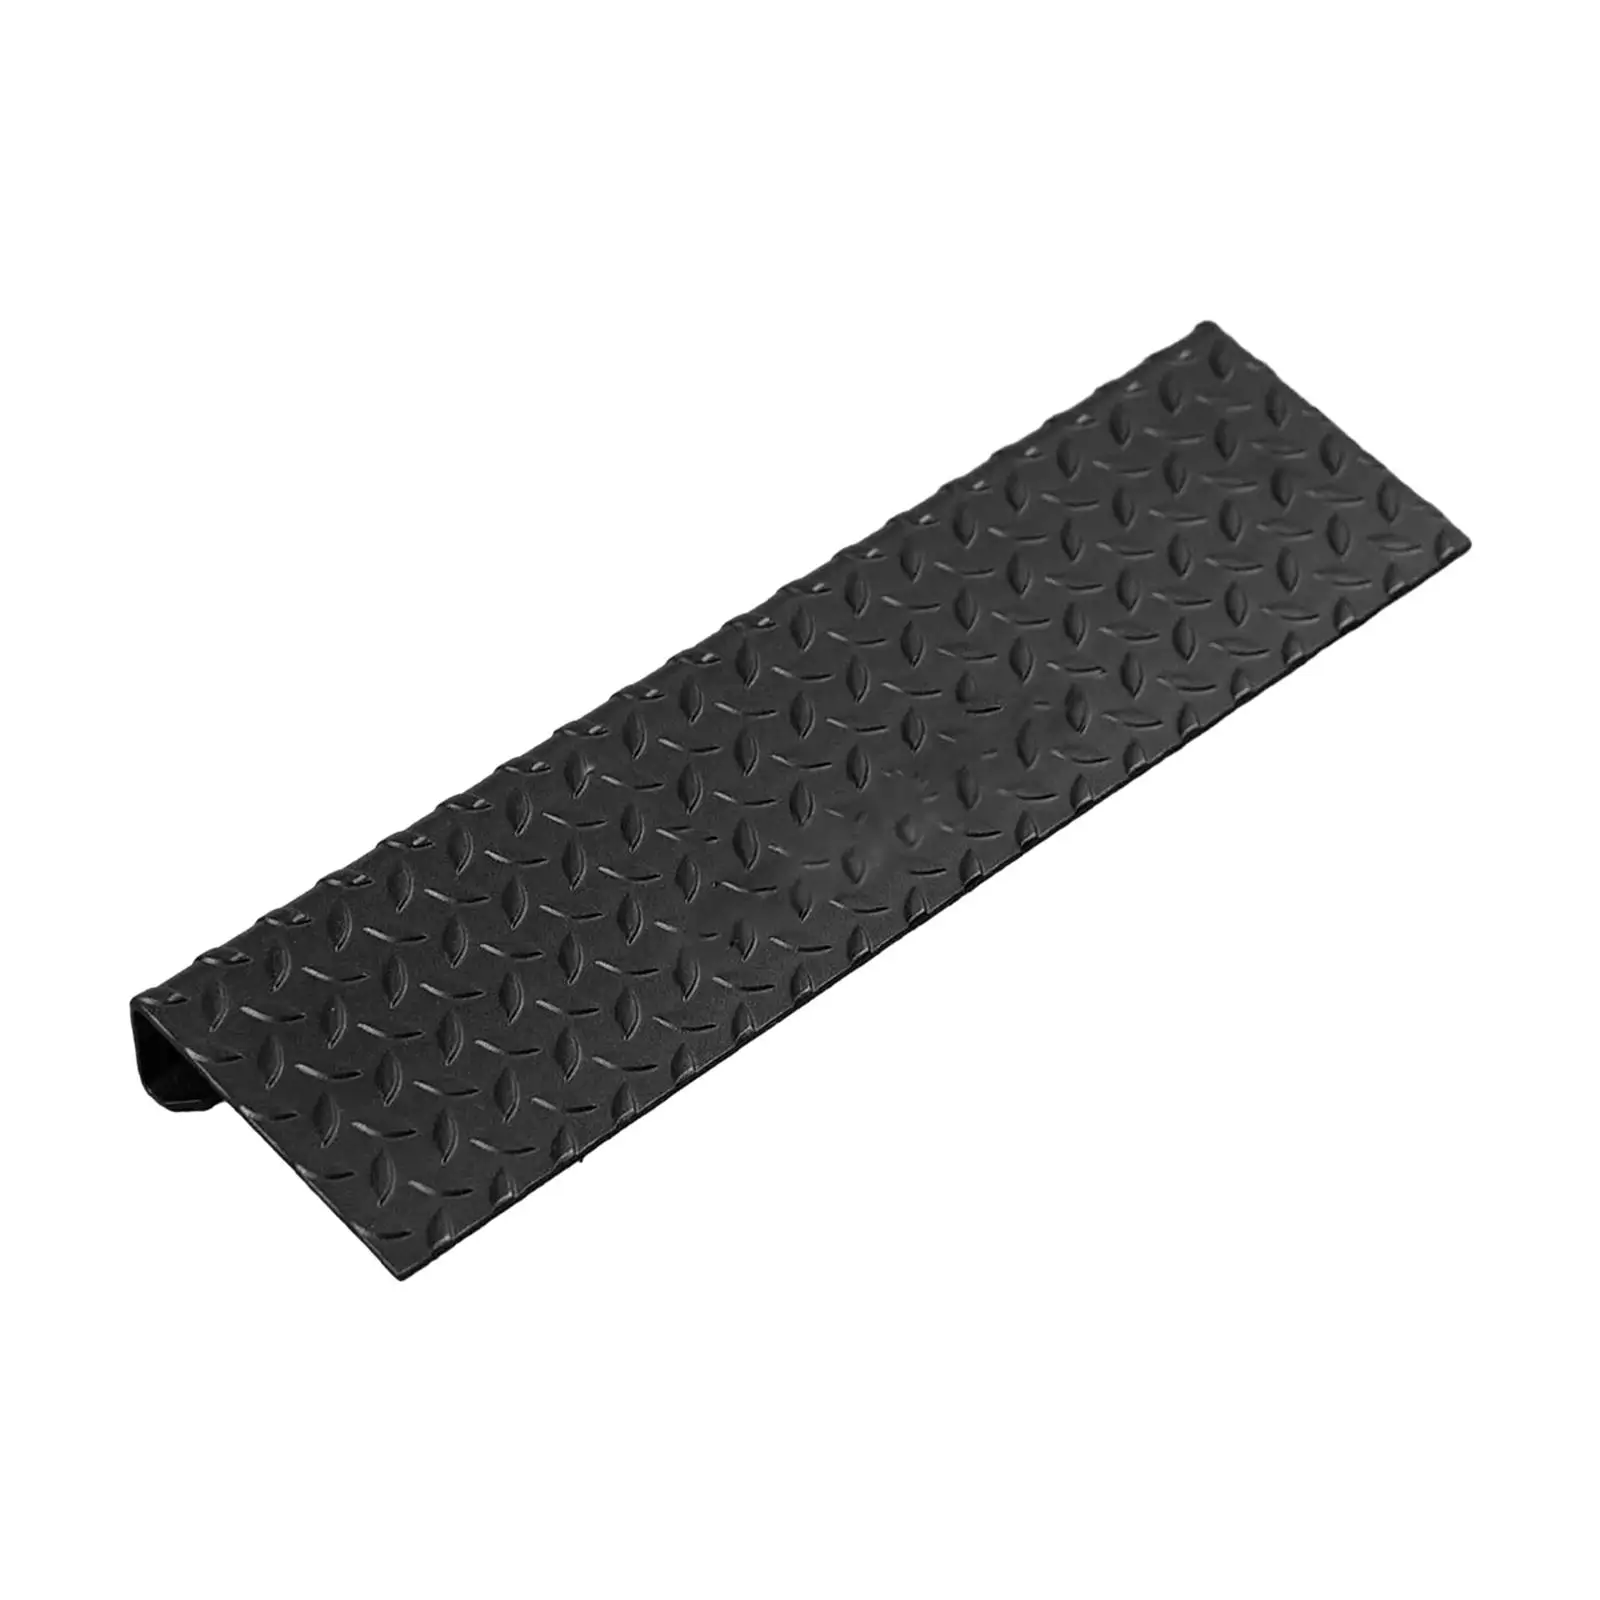 Slant Board Calf Stretcher for Stretching Tight Calves Home Gym Stretch Boards Leg Exercise Wedge Yoga Board Foot Incline Board